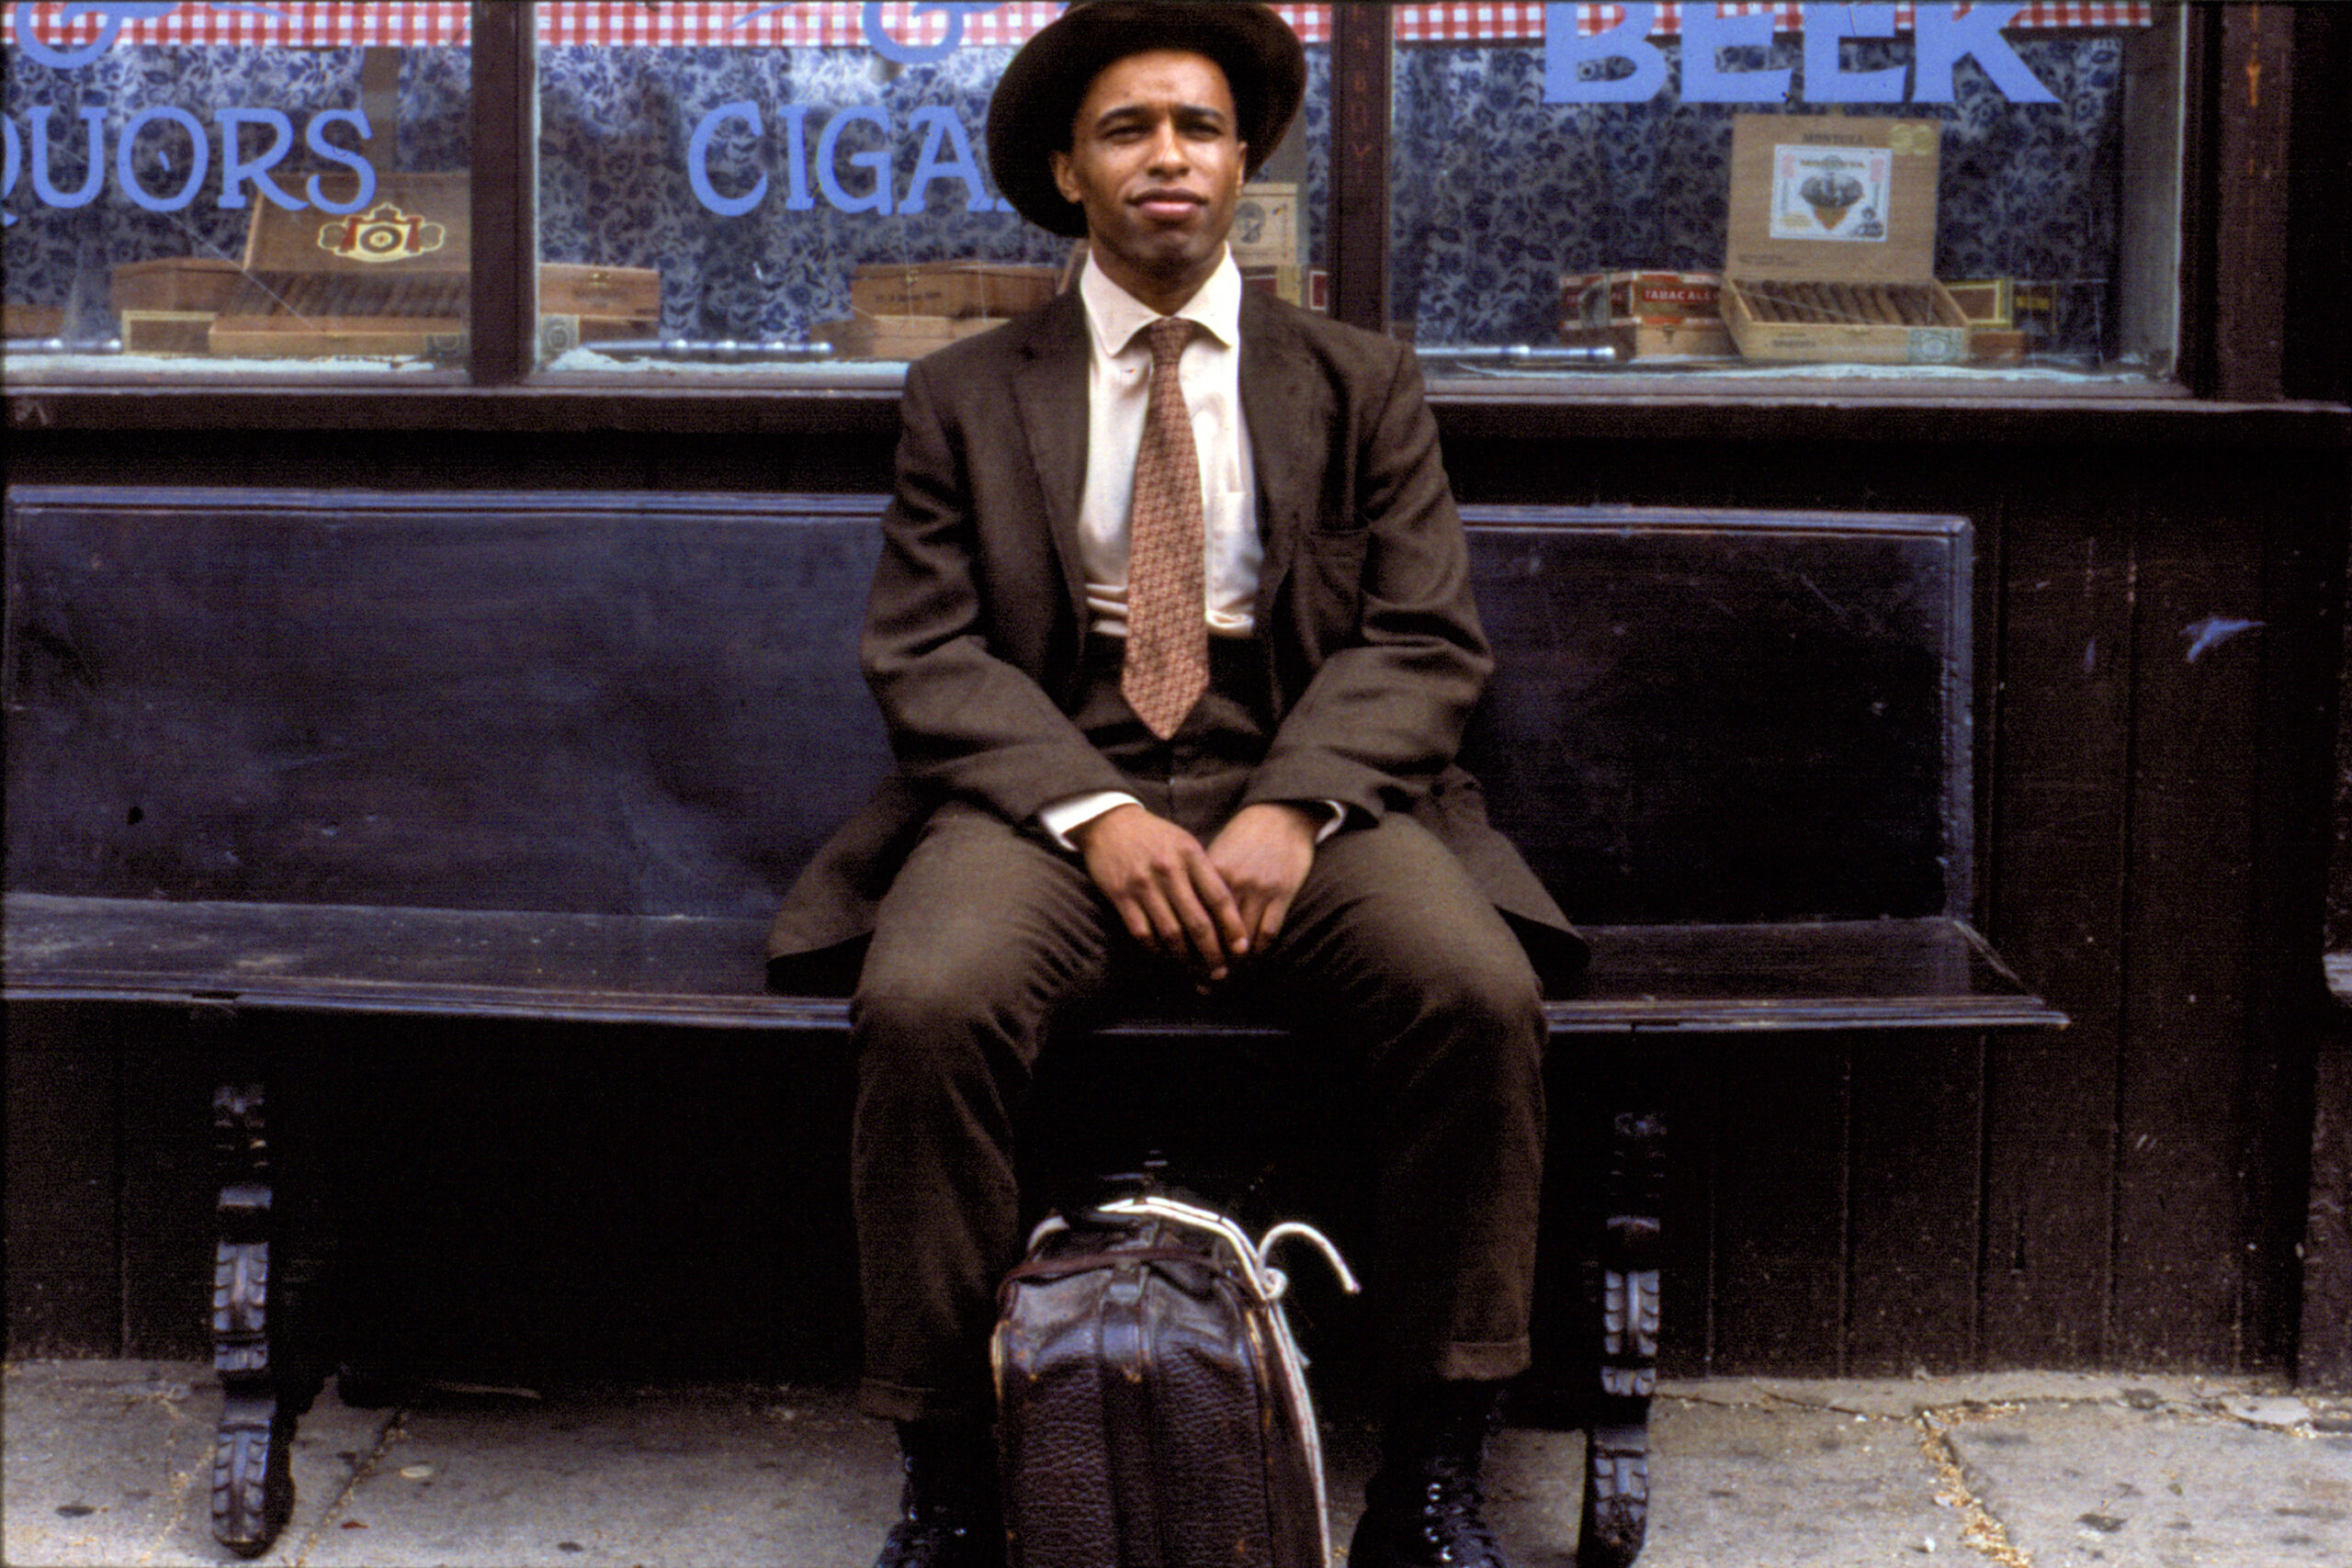 Suited up black man Frank Custer sits on bench